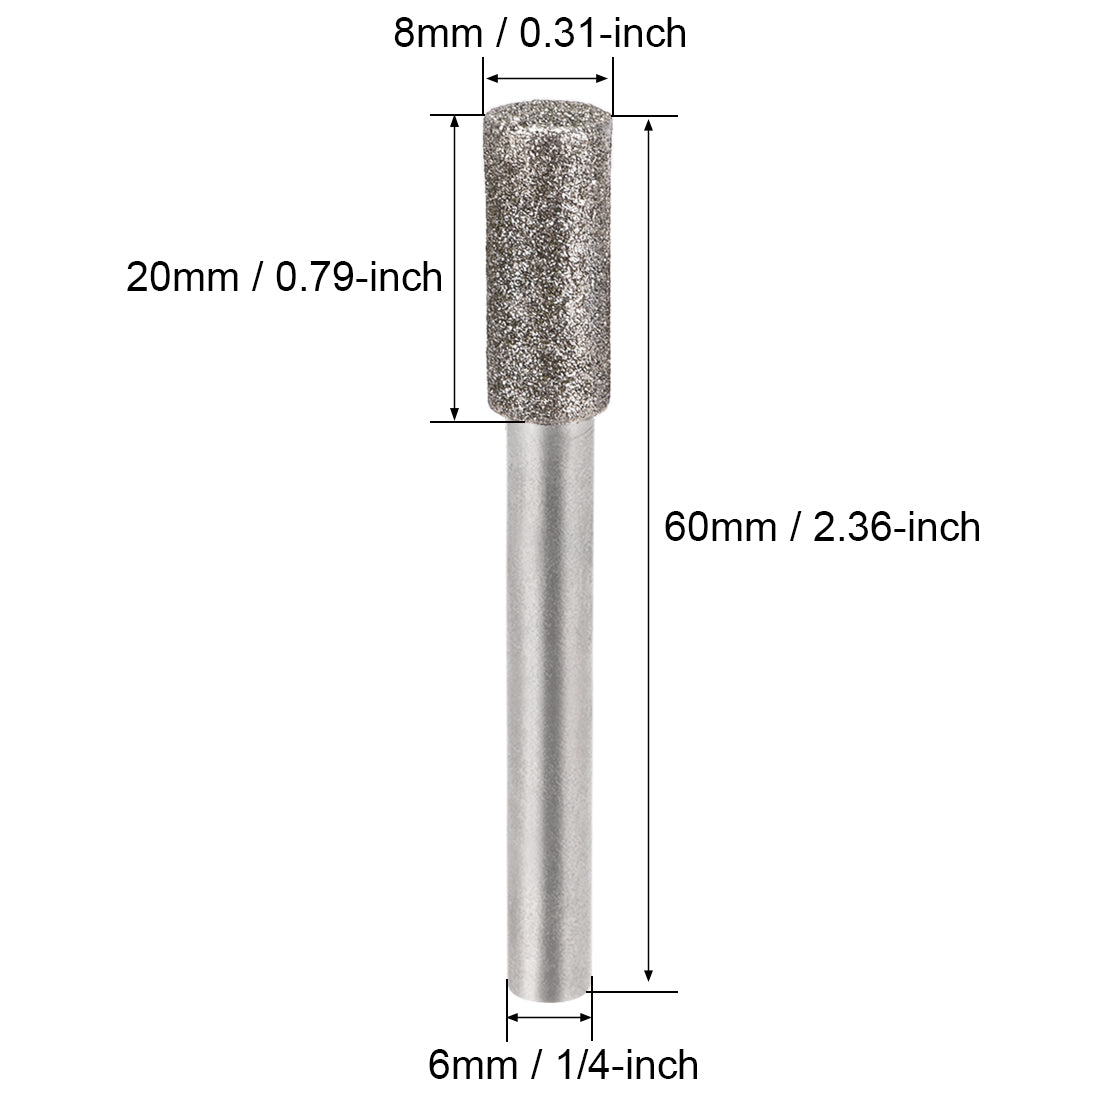 Uxcell Uxcell Diamond Burrs Bits Grinding Drill Carving Rotary Tool for Glass Stone Ceramic 120 Grit 1/4" Shank 8mm Cylinder 5 Pcs